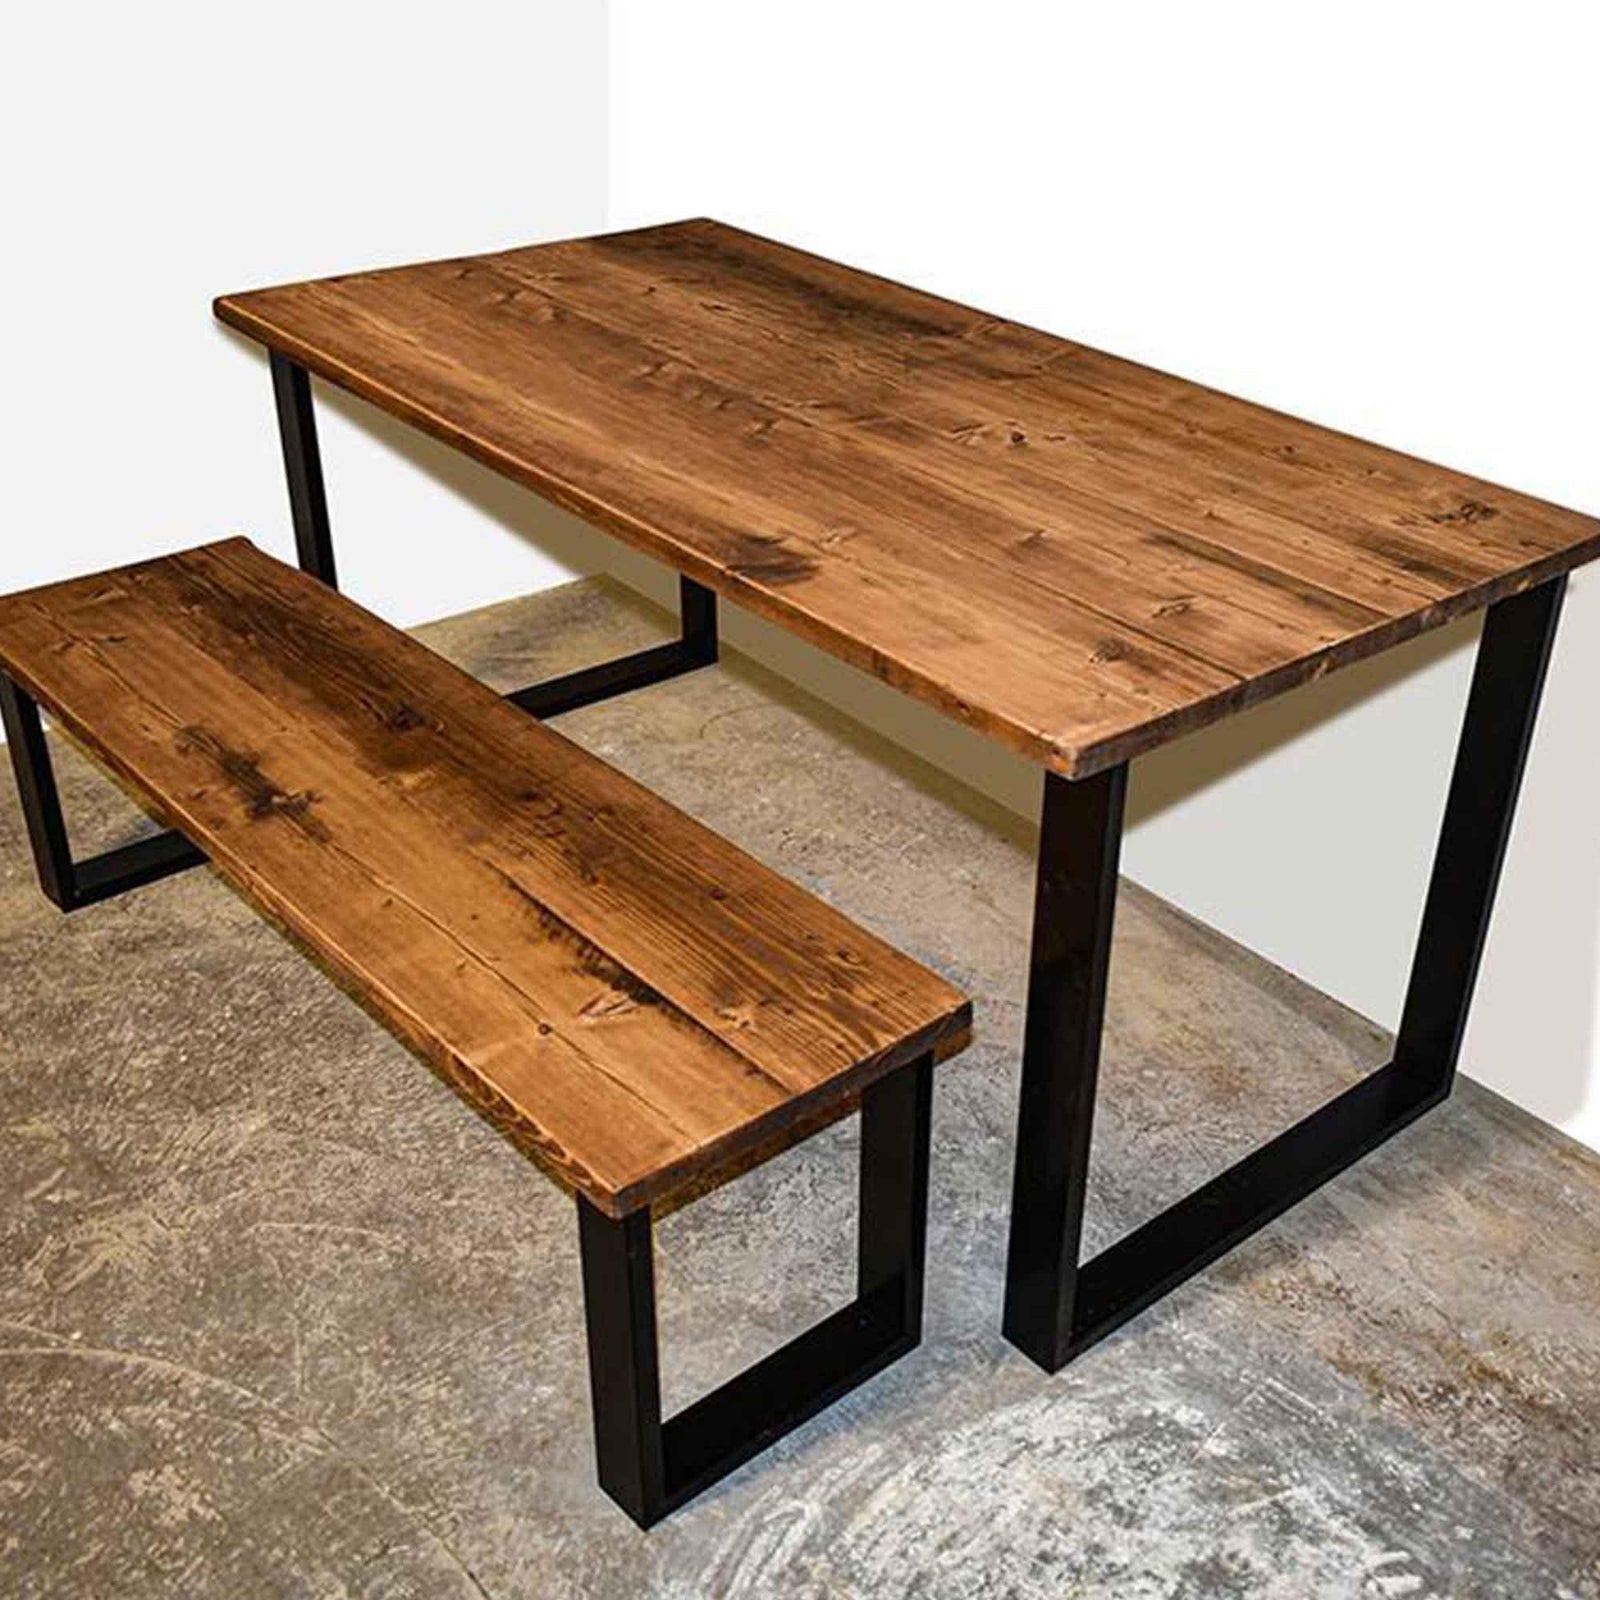 Shop Reclaimed Wood Tables, Industrial Designs